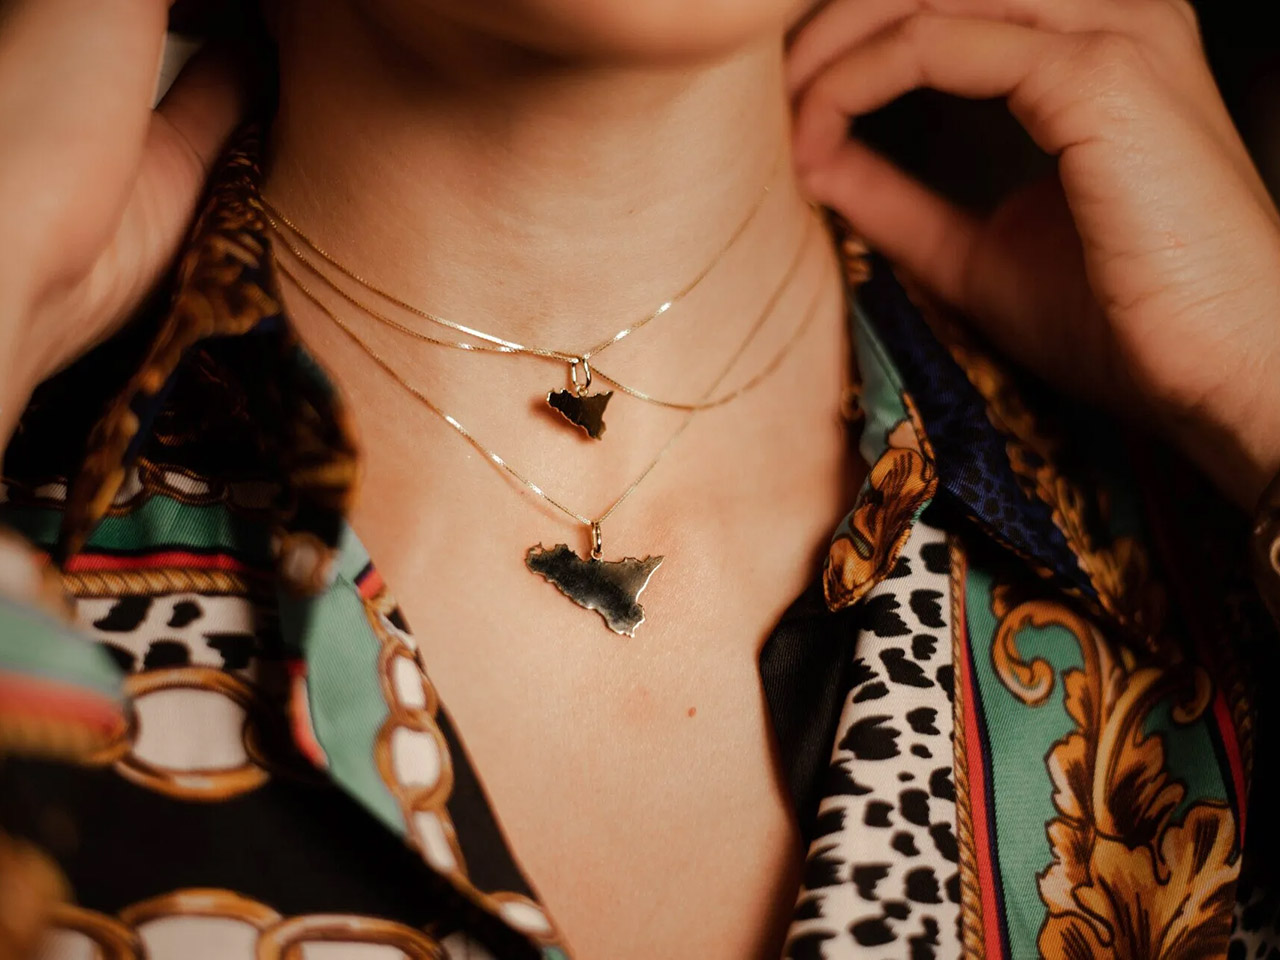 necklaces with sicily-shaped charms worn by a woman